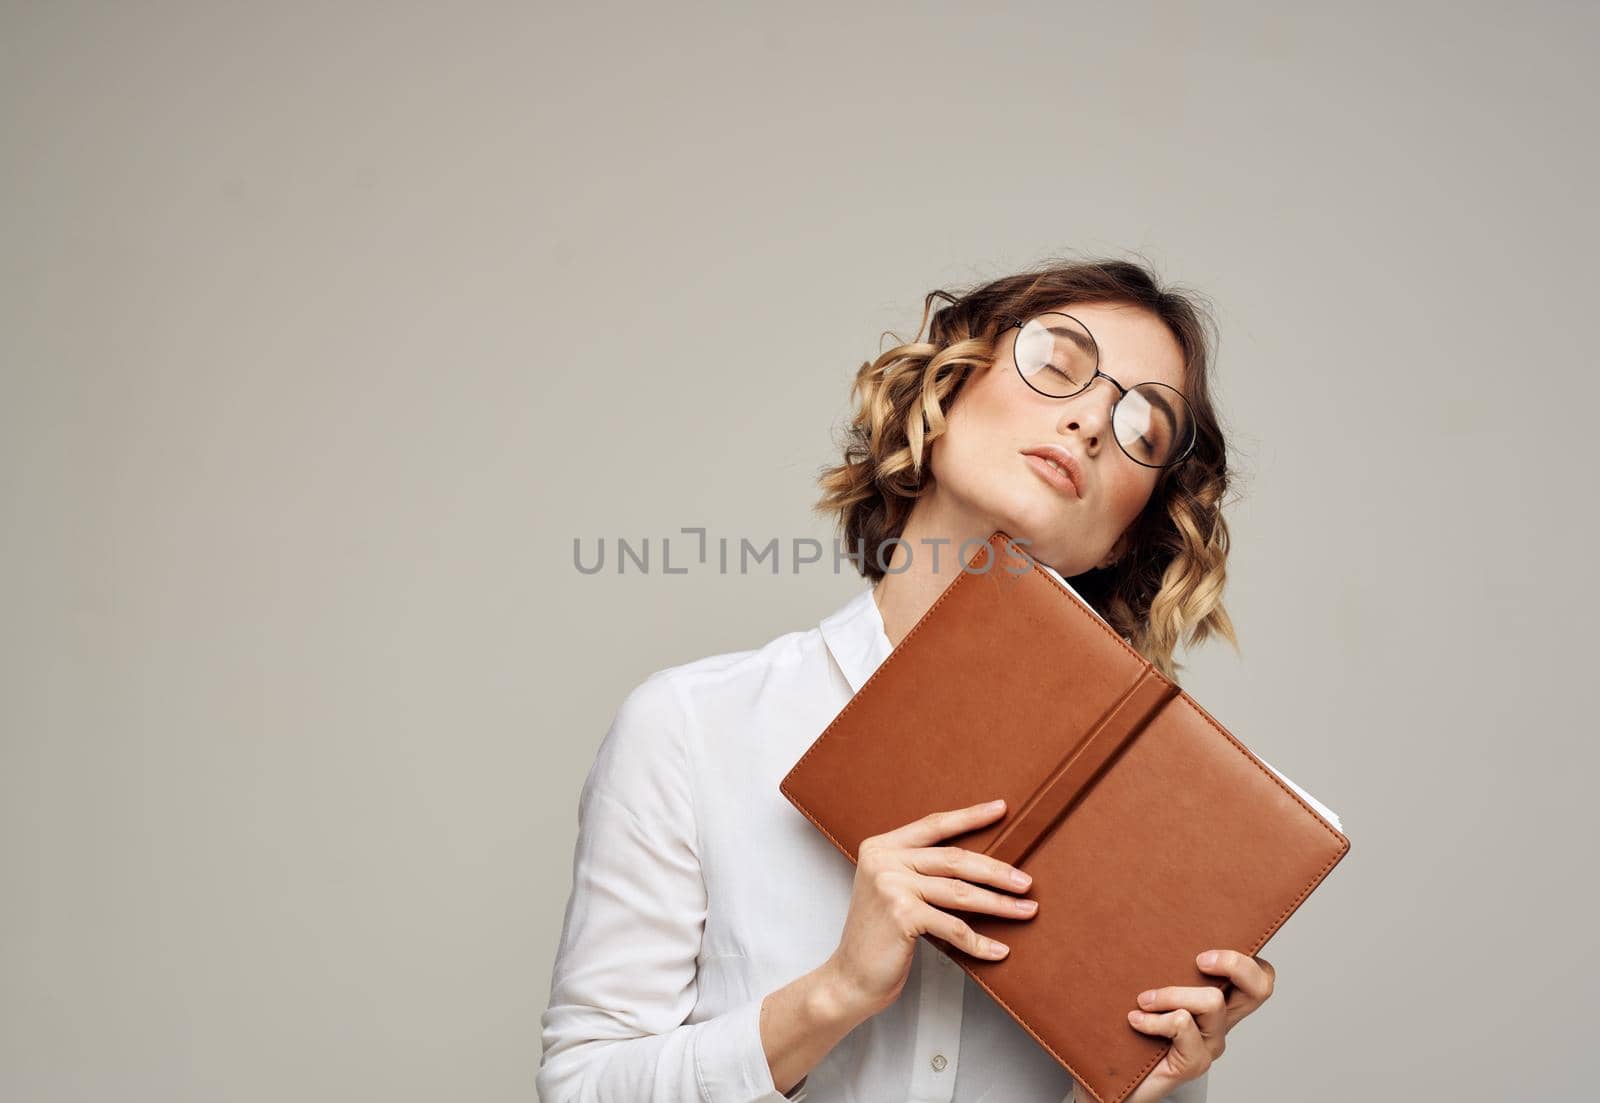 Business woman with open notebook in her hands and glasses on her face, white shirt by SHOTPRIME